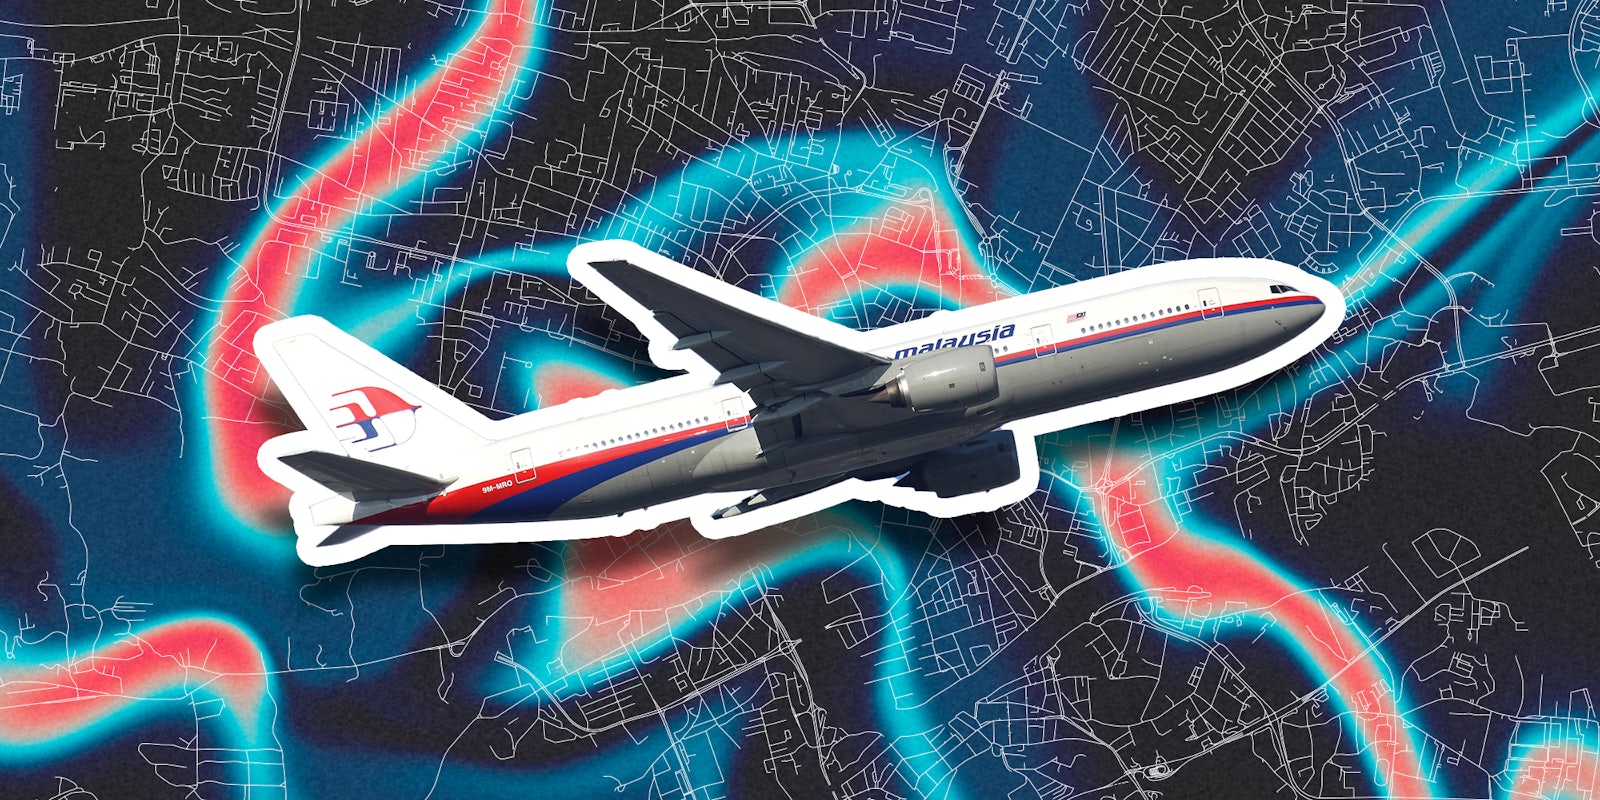 Malaysia Airlines flight 370 on Google Maps